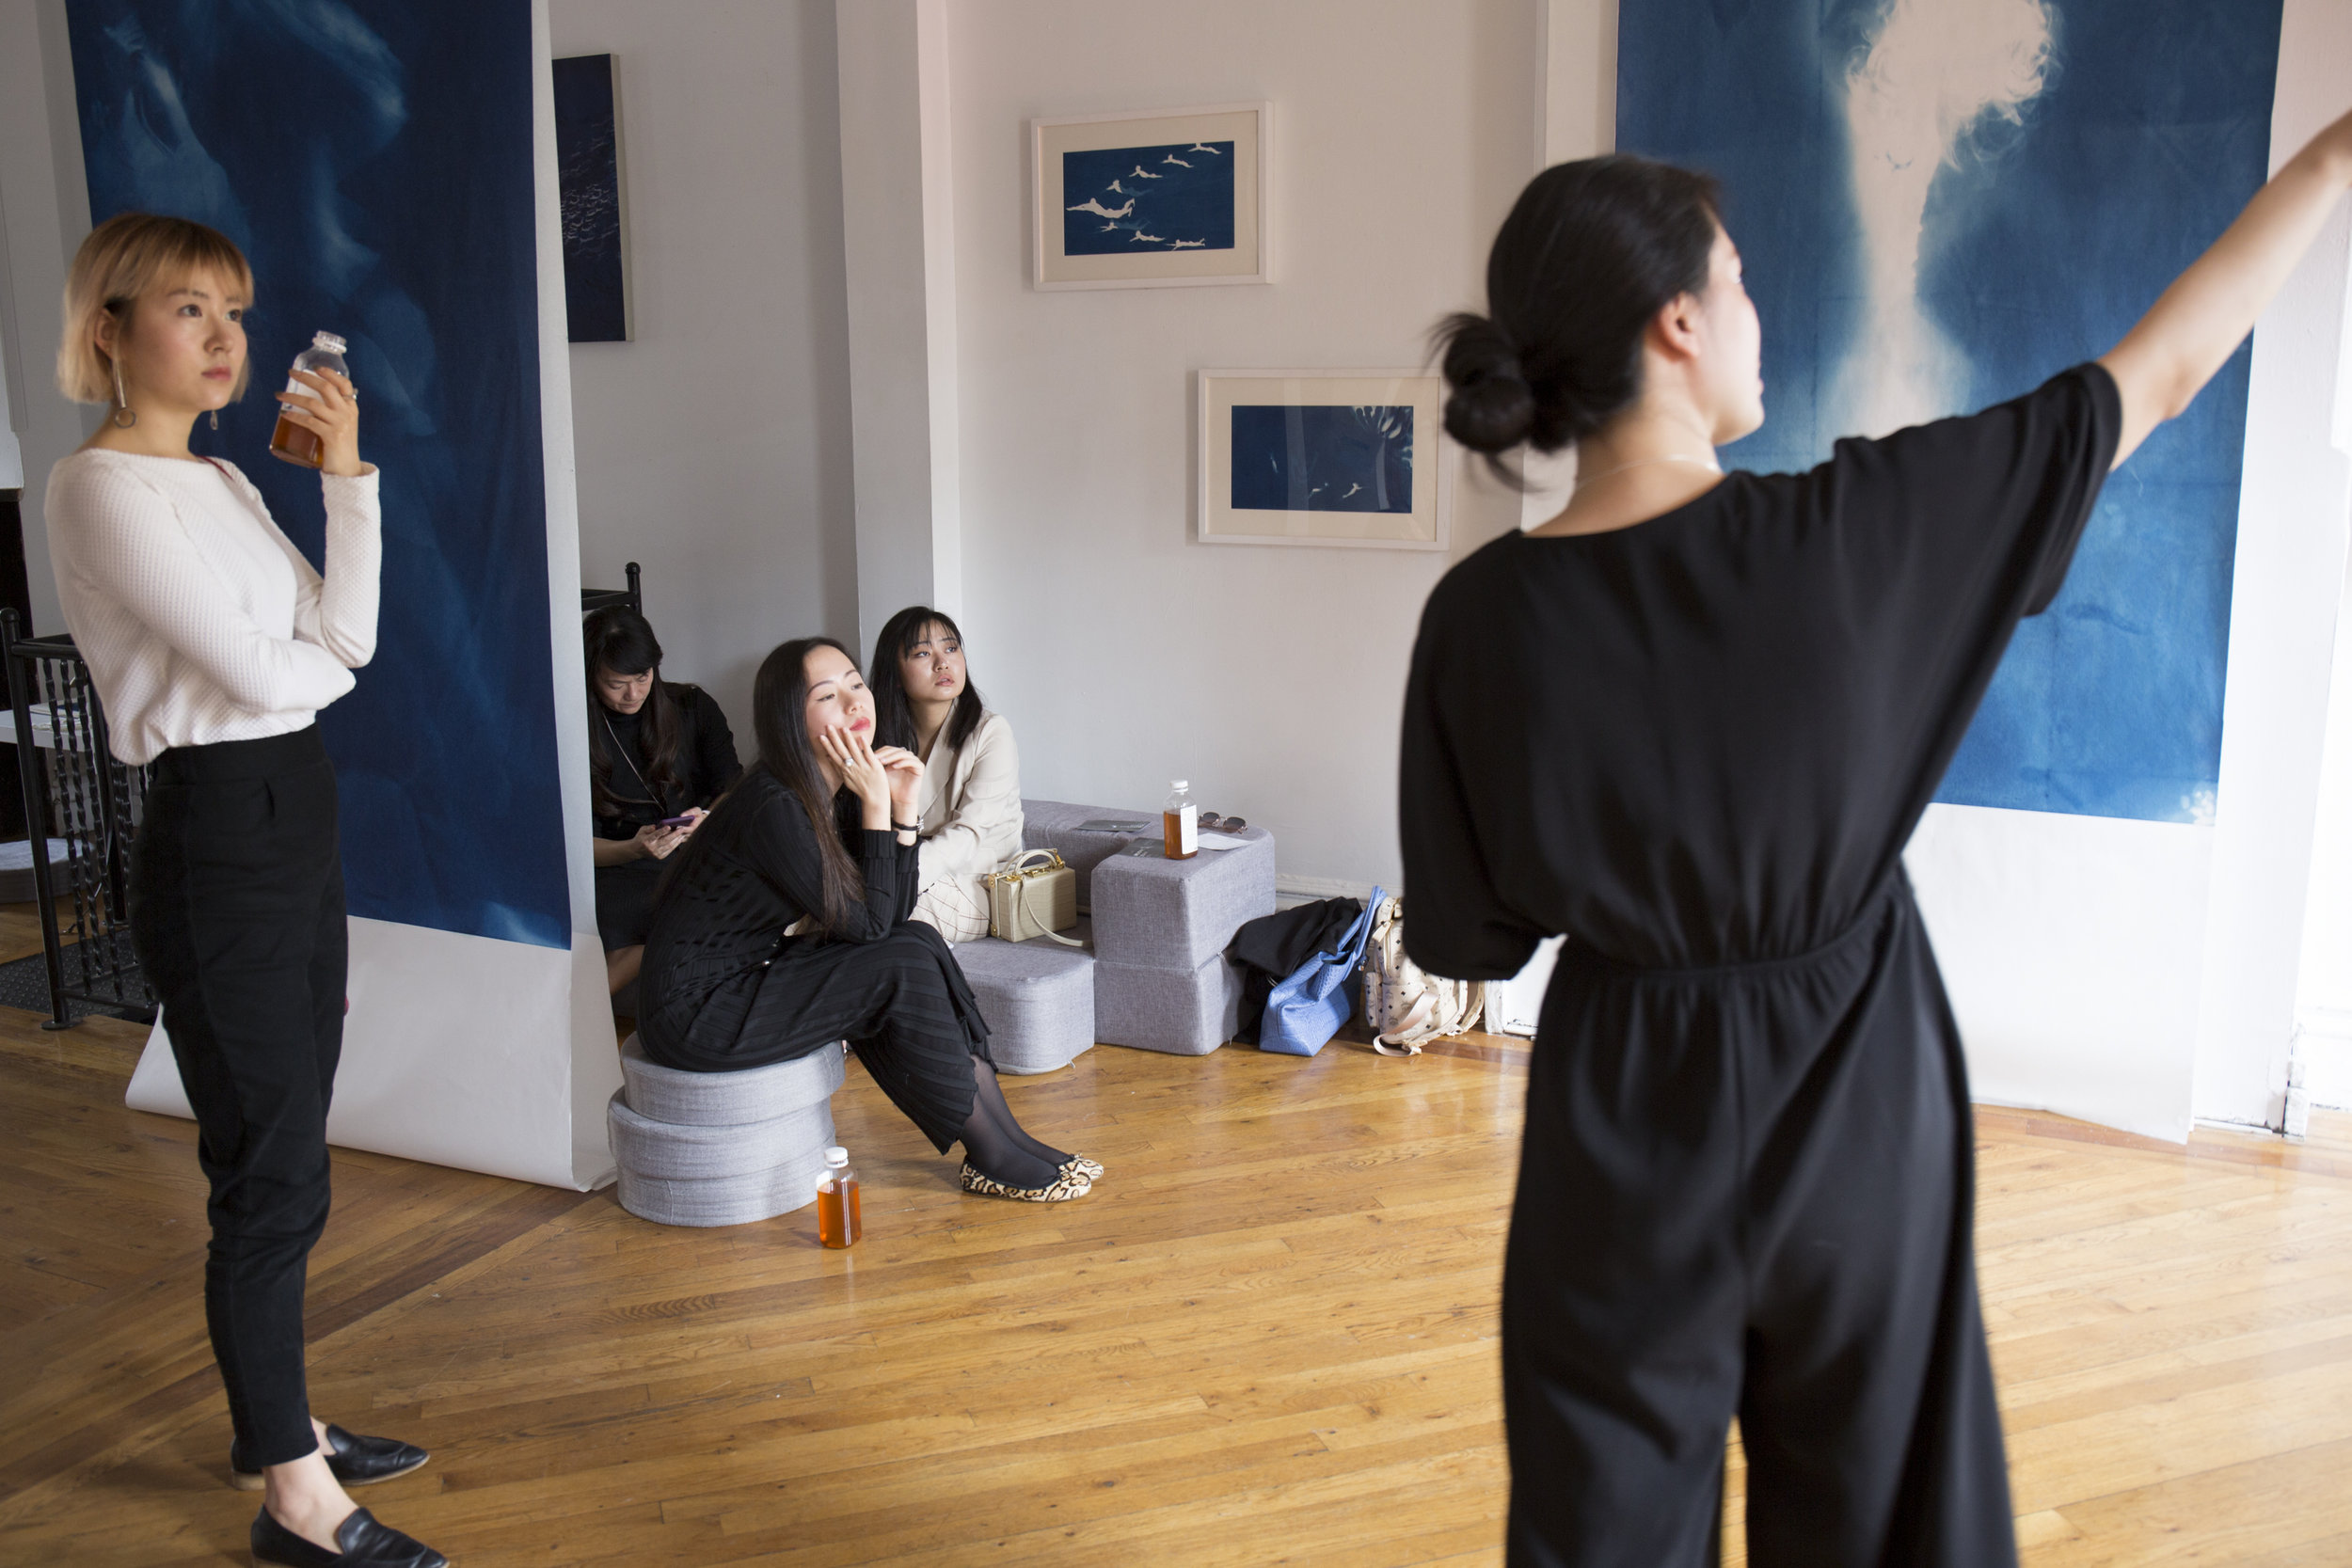  Tracking the White Shadow Performance, photographed by Alice Luo, courtesy Fou Gallery. 